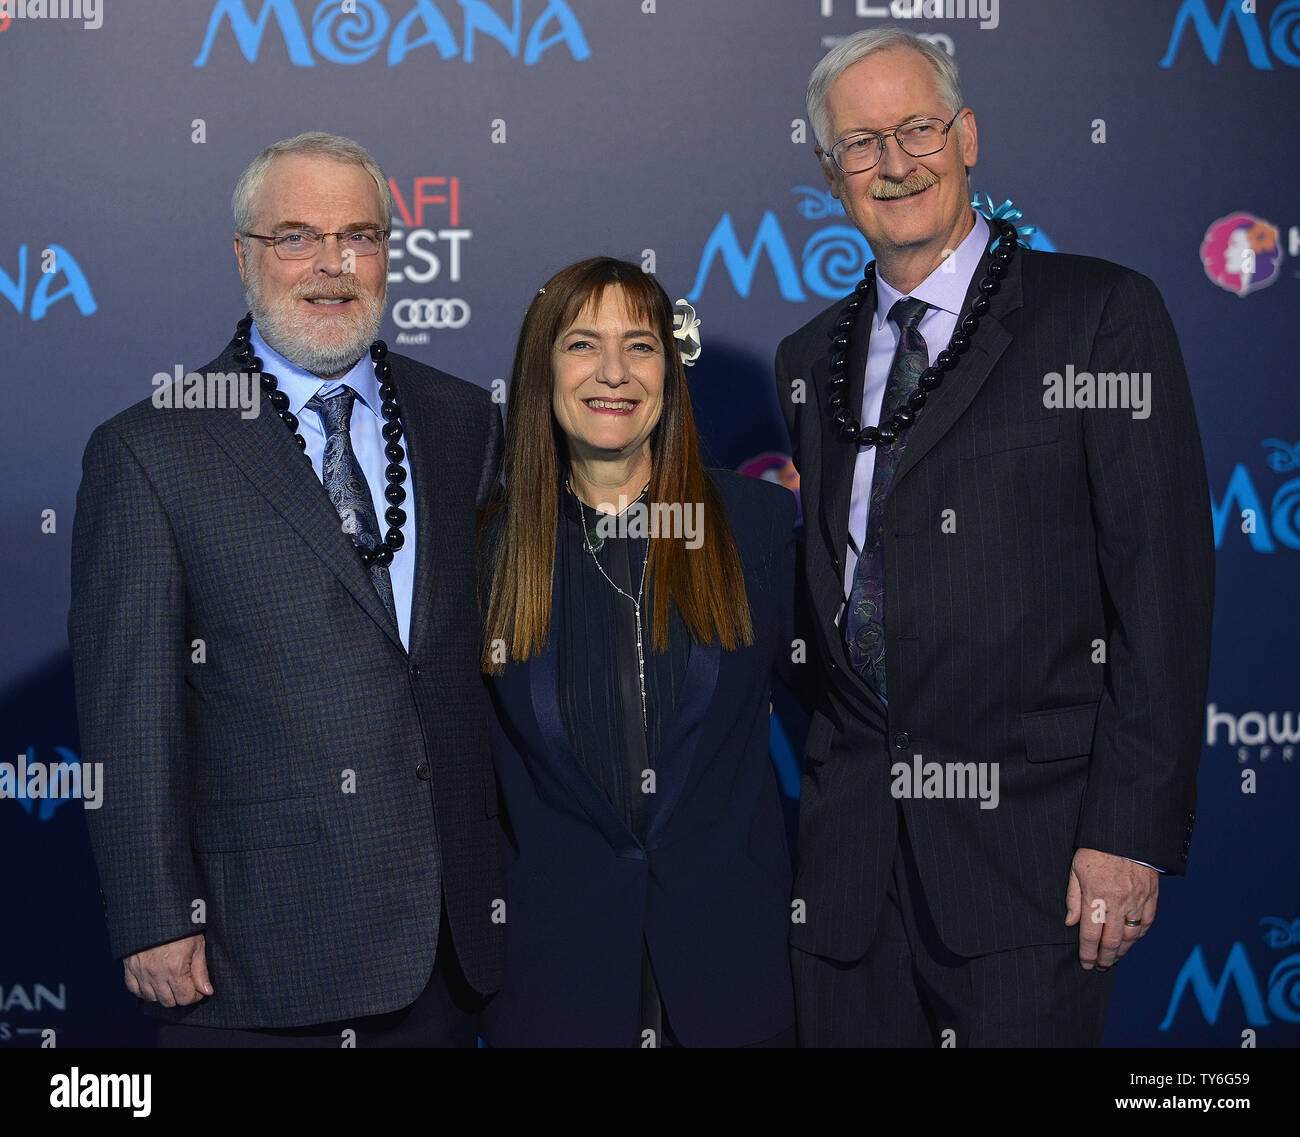 Producer Osnat Shurer (center) and co-directors Ron Clements (L) and John Musker arrive at the world premiere of Walt Disney Animation Studios' 'Moana' at Hollywood's El Capitan Theatre in Los Angeles, California on November 14, 2016. The premiere is part of the lineup for AFI FEST 2016. Photo by Christine Chew/UPI Stock Photo